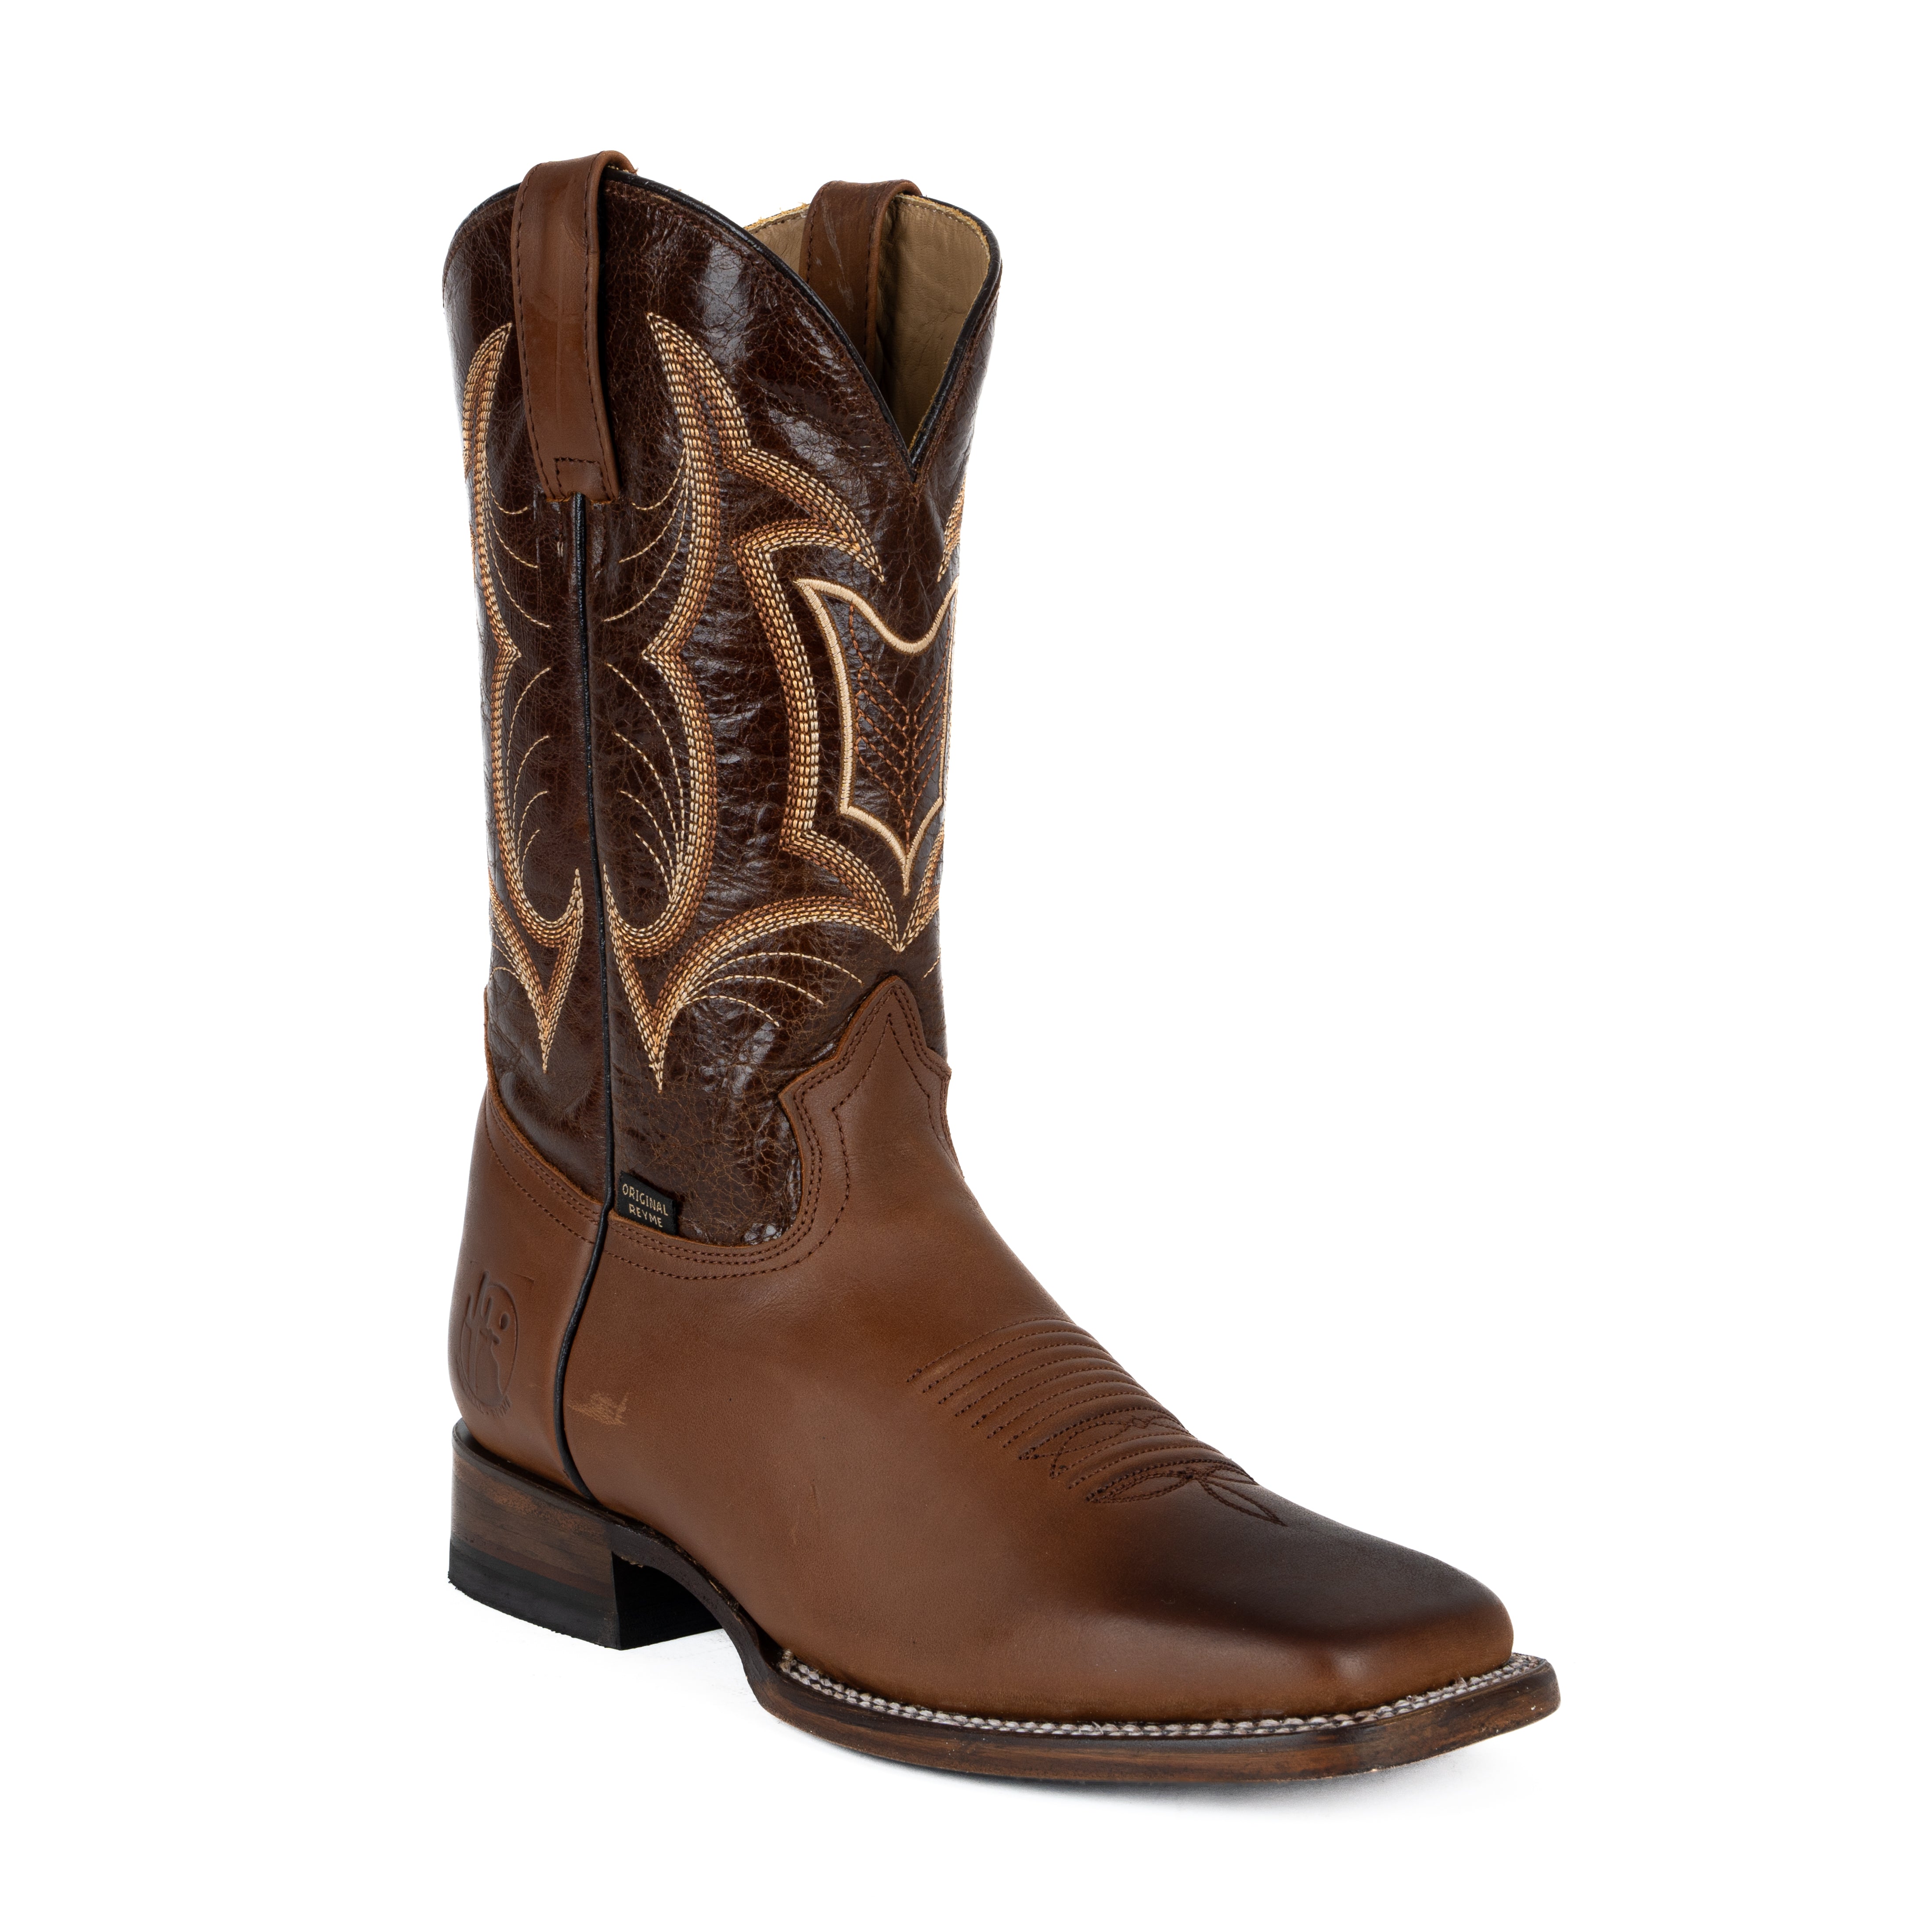 Bota Reyme Crazy Roble Forest Tabaco Caballero